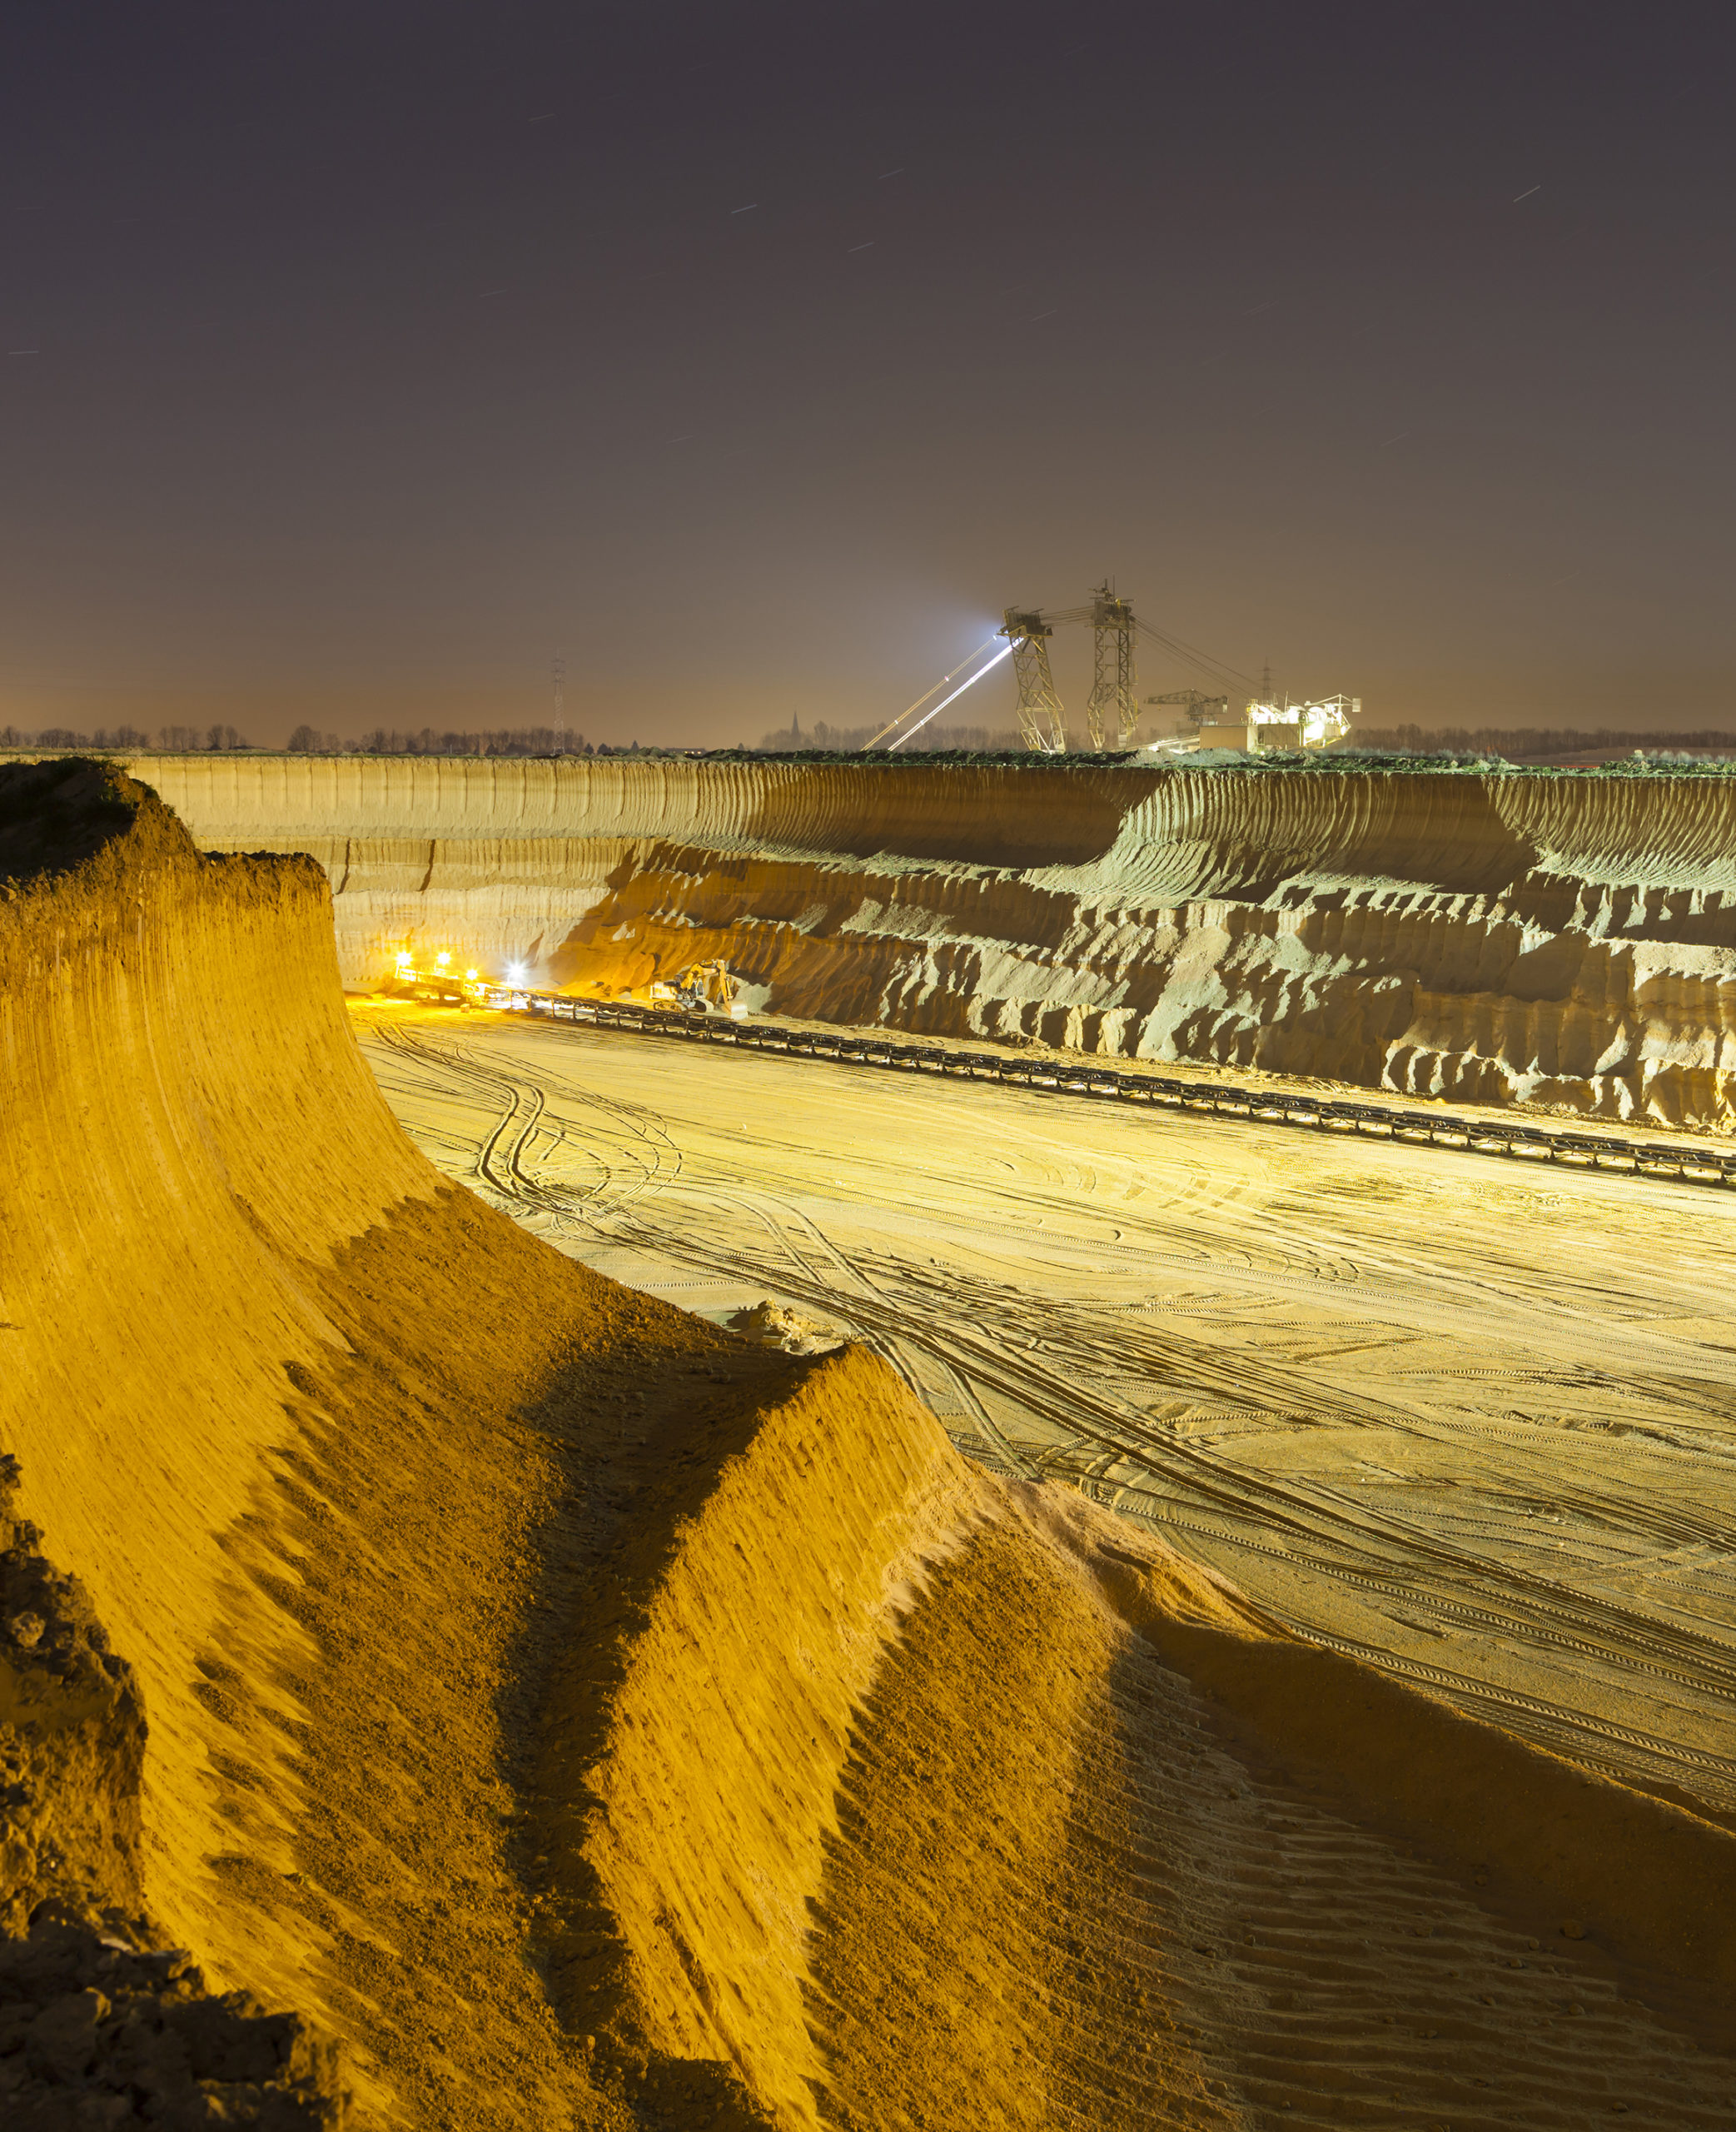 Pit Mine Wall At Night - A steep lignite pit mine wall illuminated at night with an excavator in the background